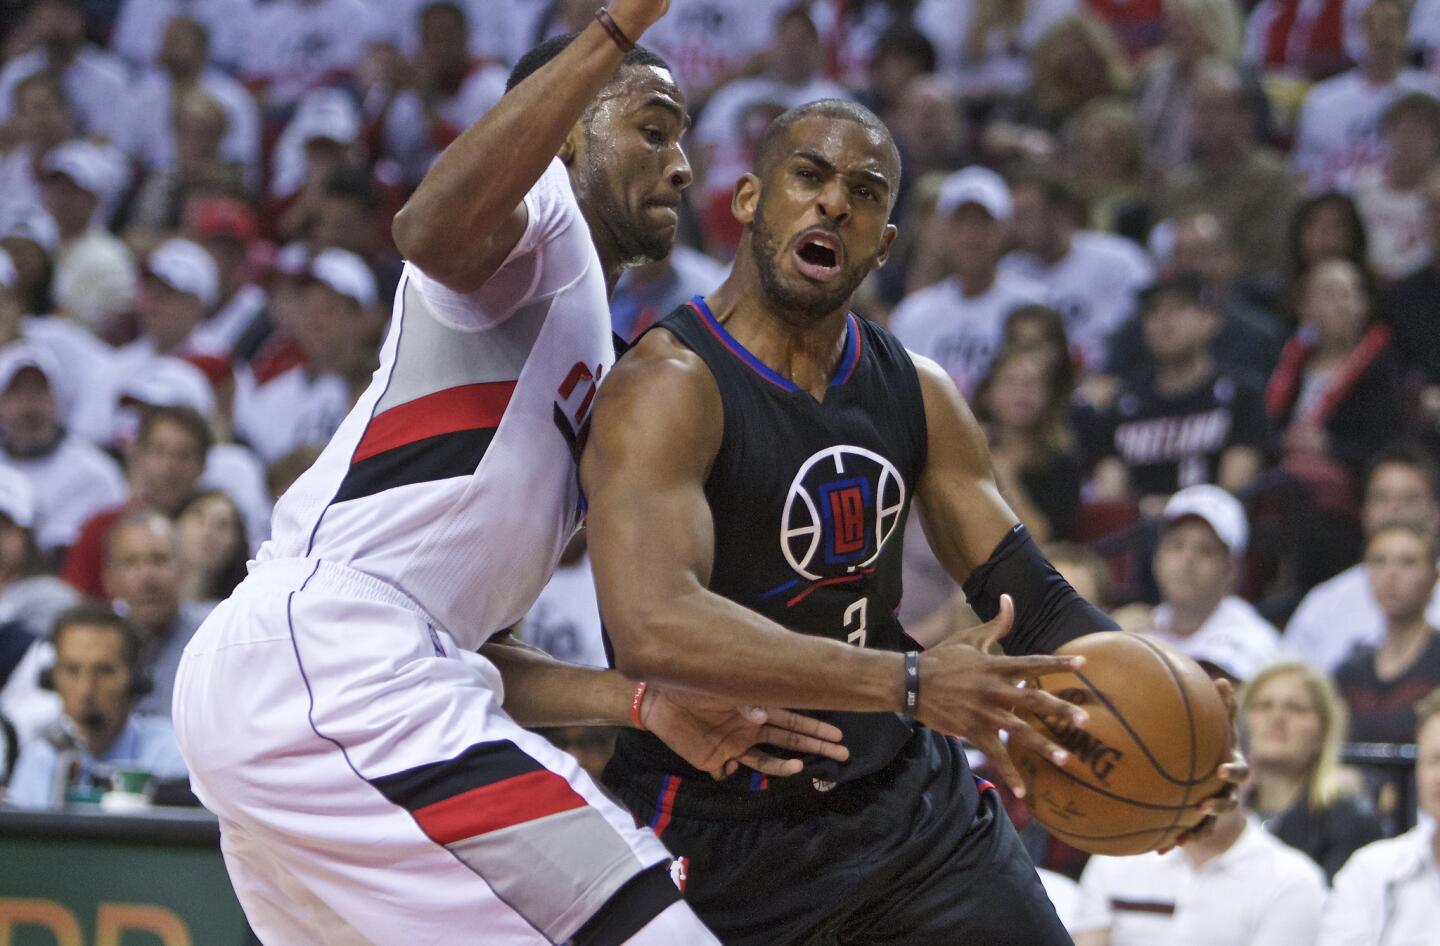 Do injuries to Chris Paul and Blake Griffin foretell a breakup of Clippers core?